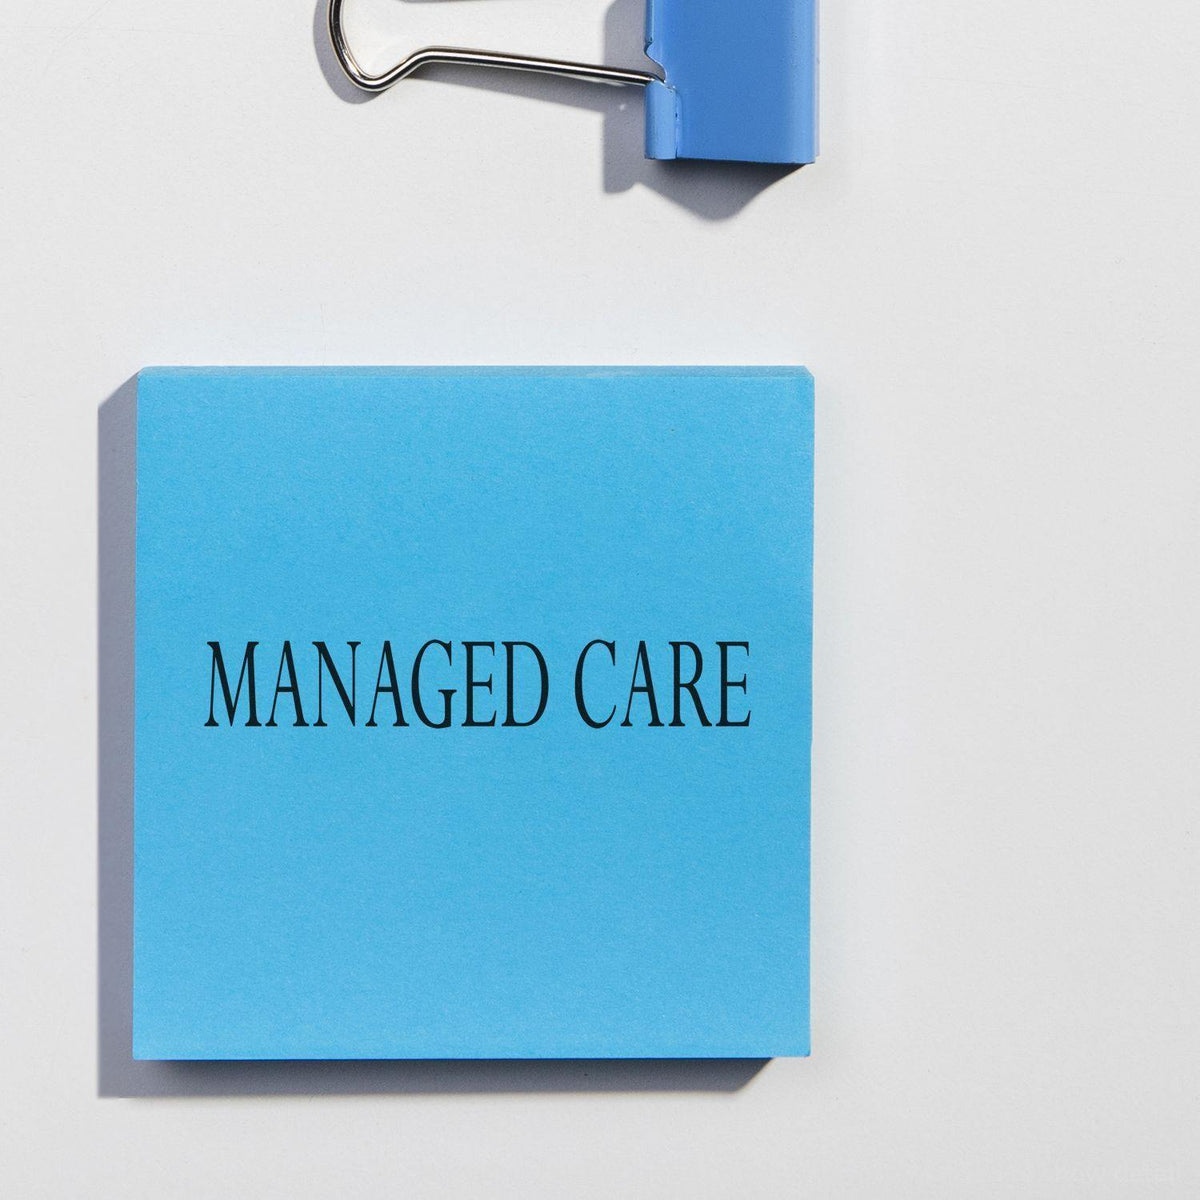 Large Managed Care Rubber Stamp In Use Photo